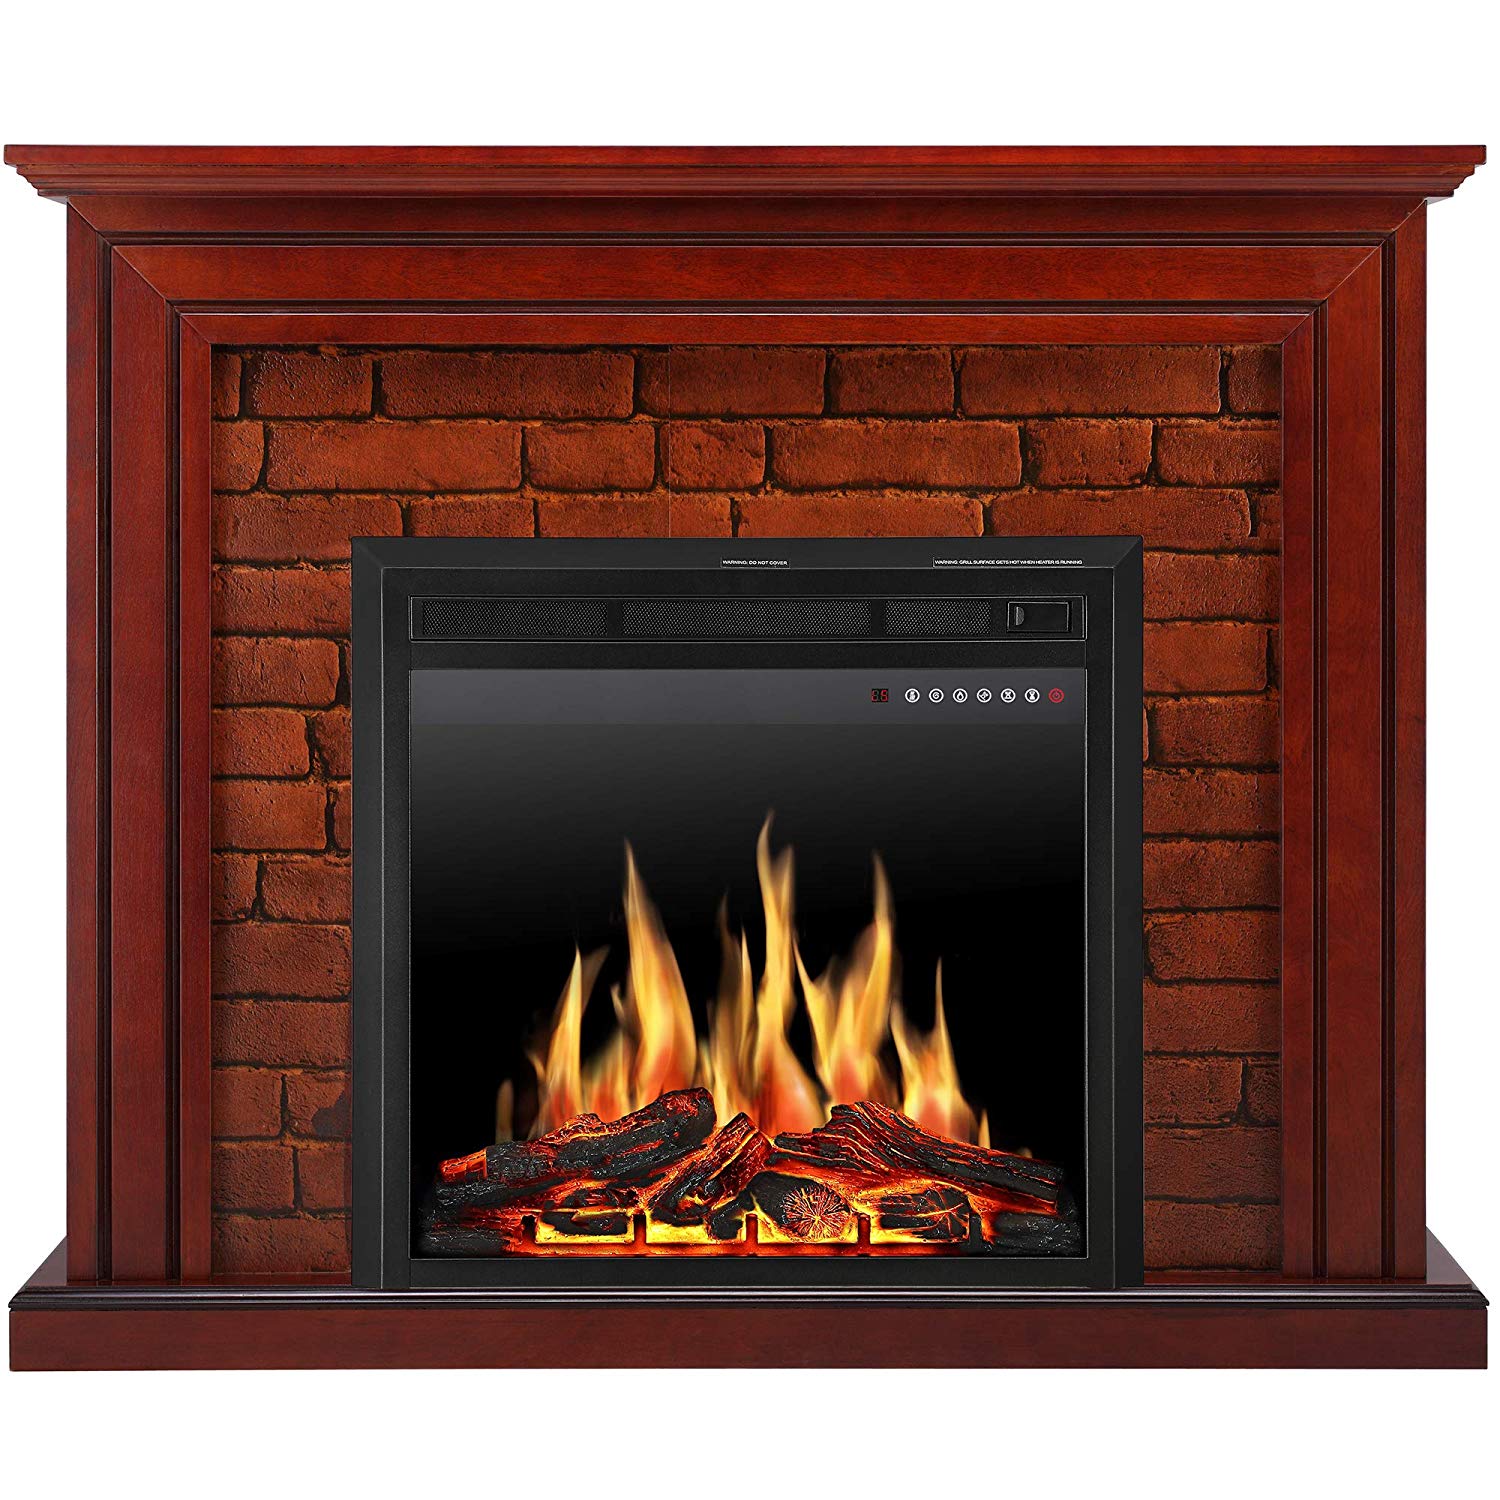 Electric Fireplace Logs with Heater Awesome Jamfly Electric Fireplace Mantel Package Traditional Brick Wall Design Heater with Remote Control and Led touch Screen Home Accent Furnishings